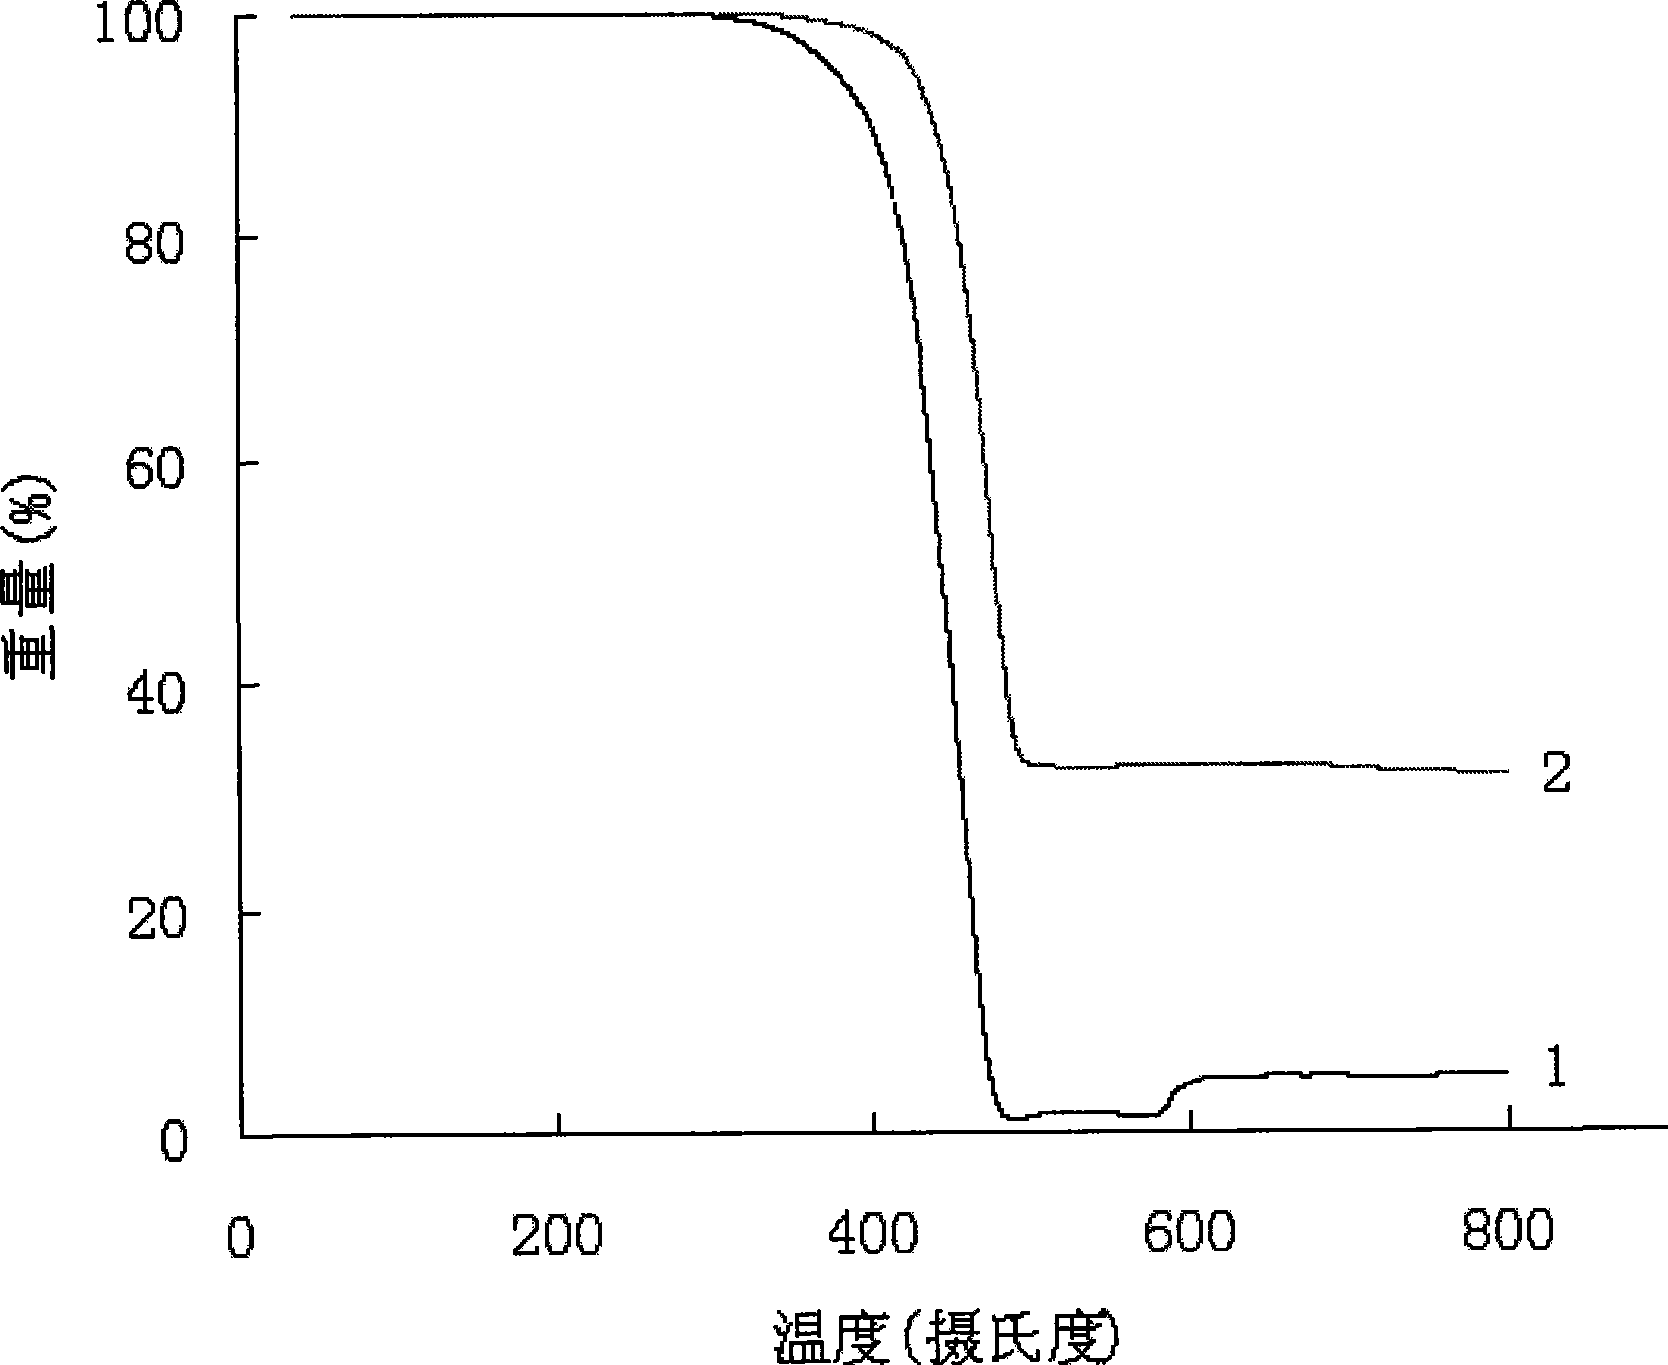 Polypropylene composite material containing potassium titanate crystal whiskers and wood powder